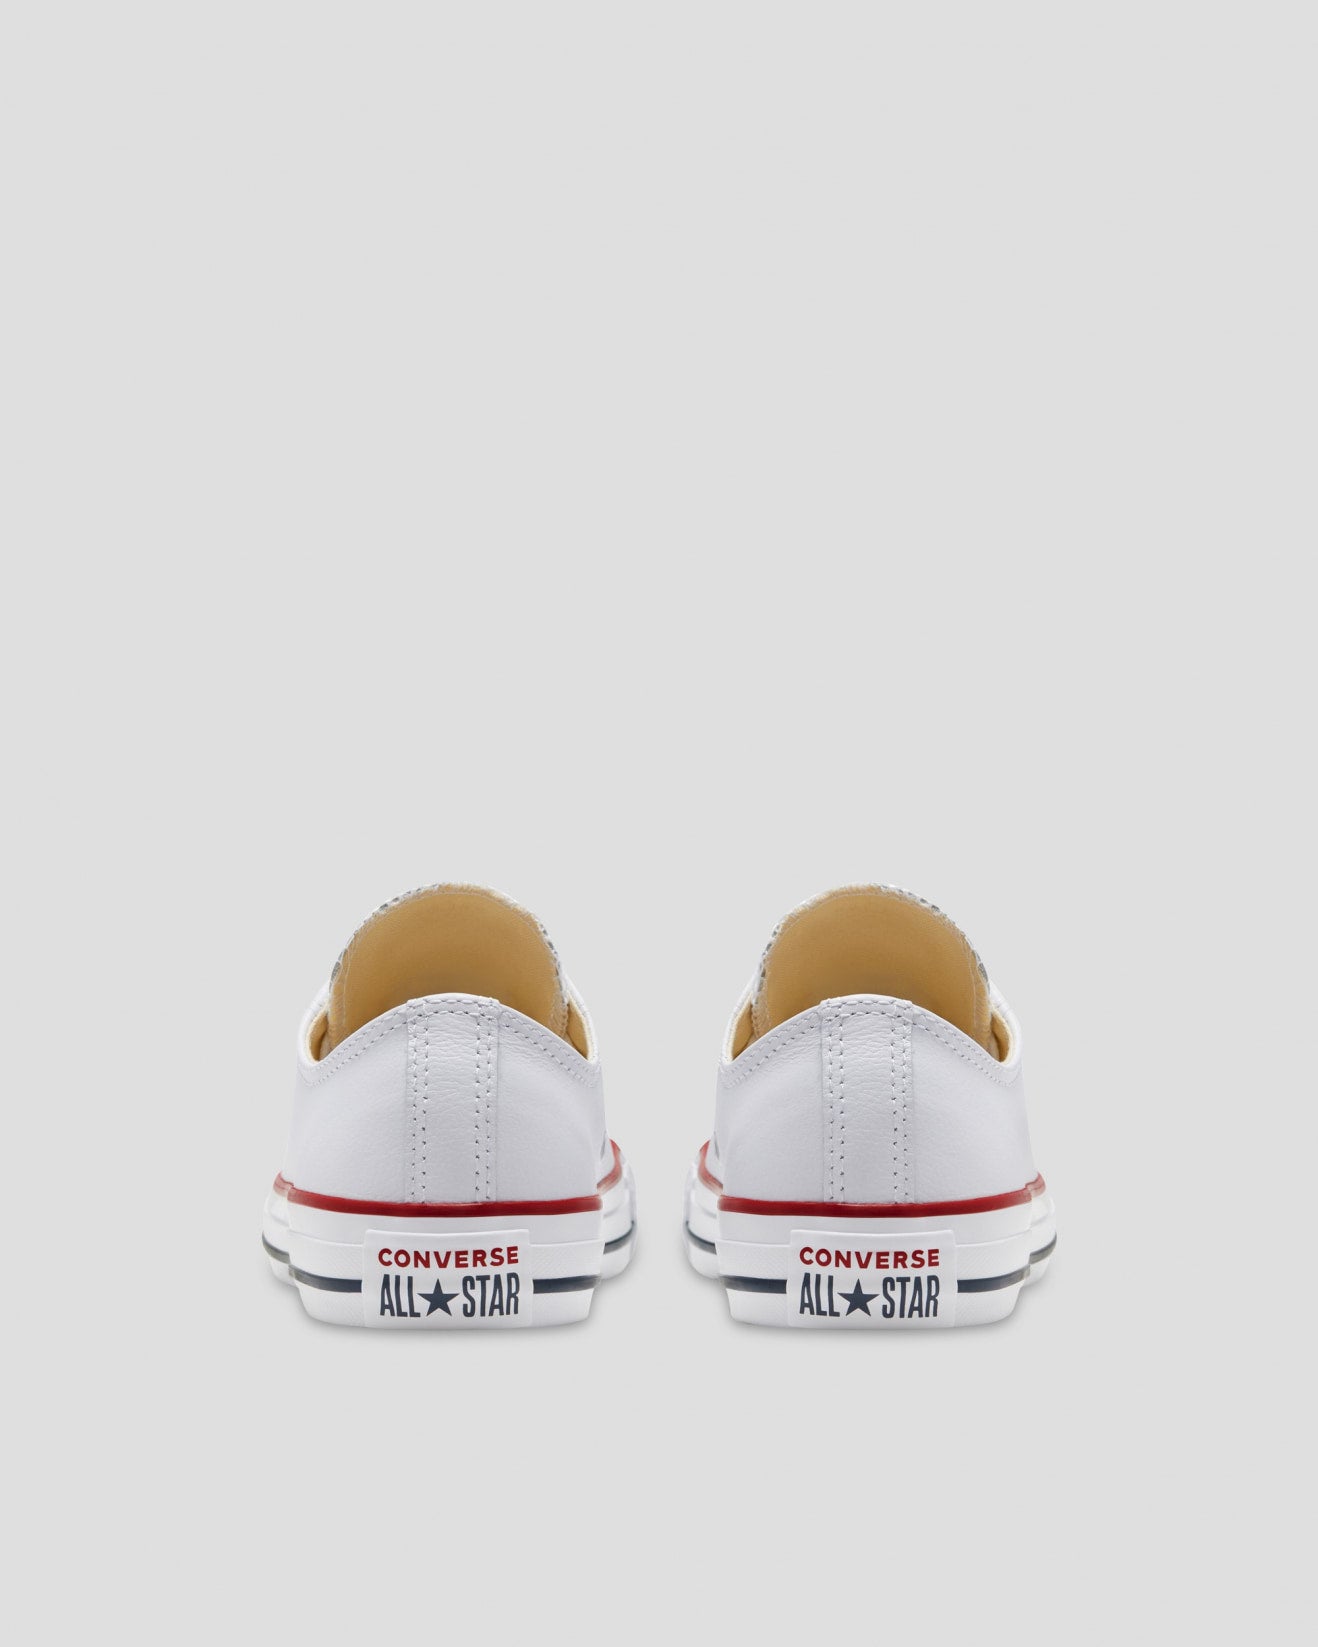 CONVERSE Chuck Taylor All Star Leather Low Shoe - White - VENUE.